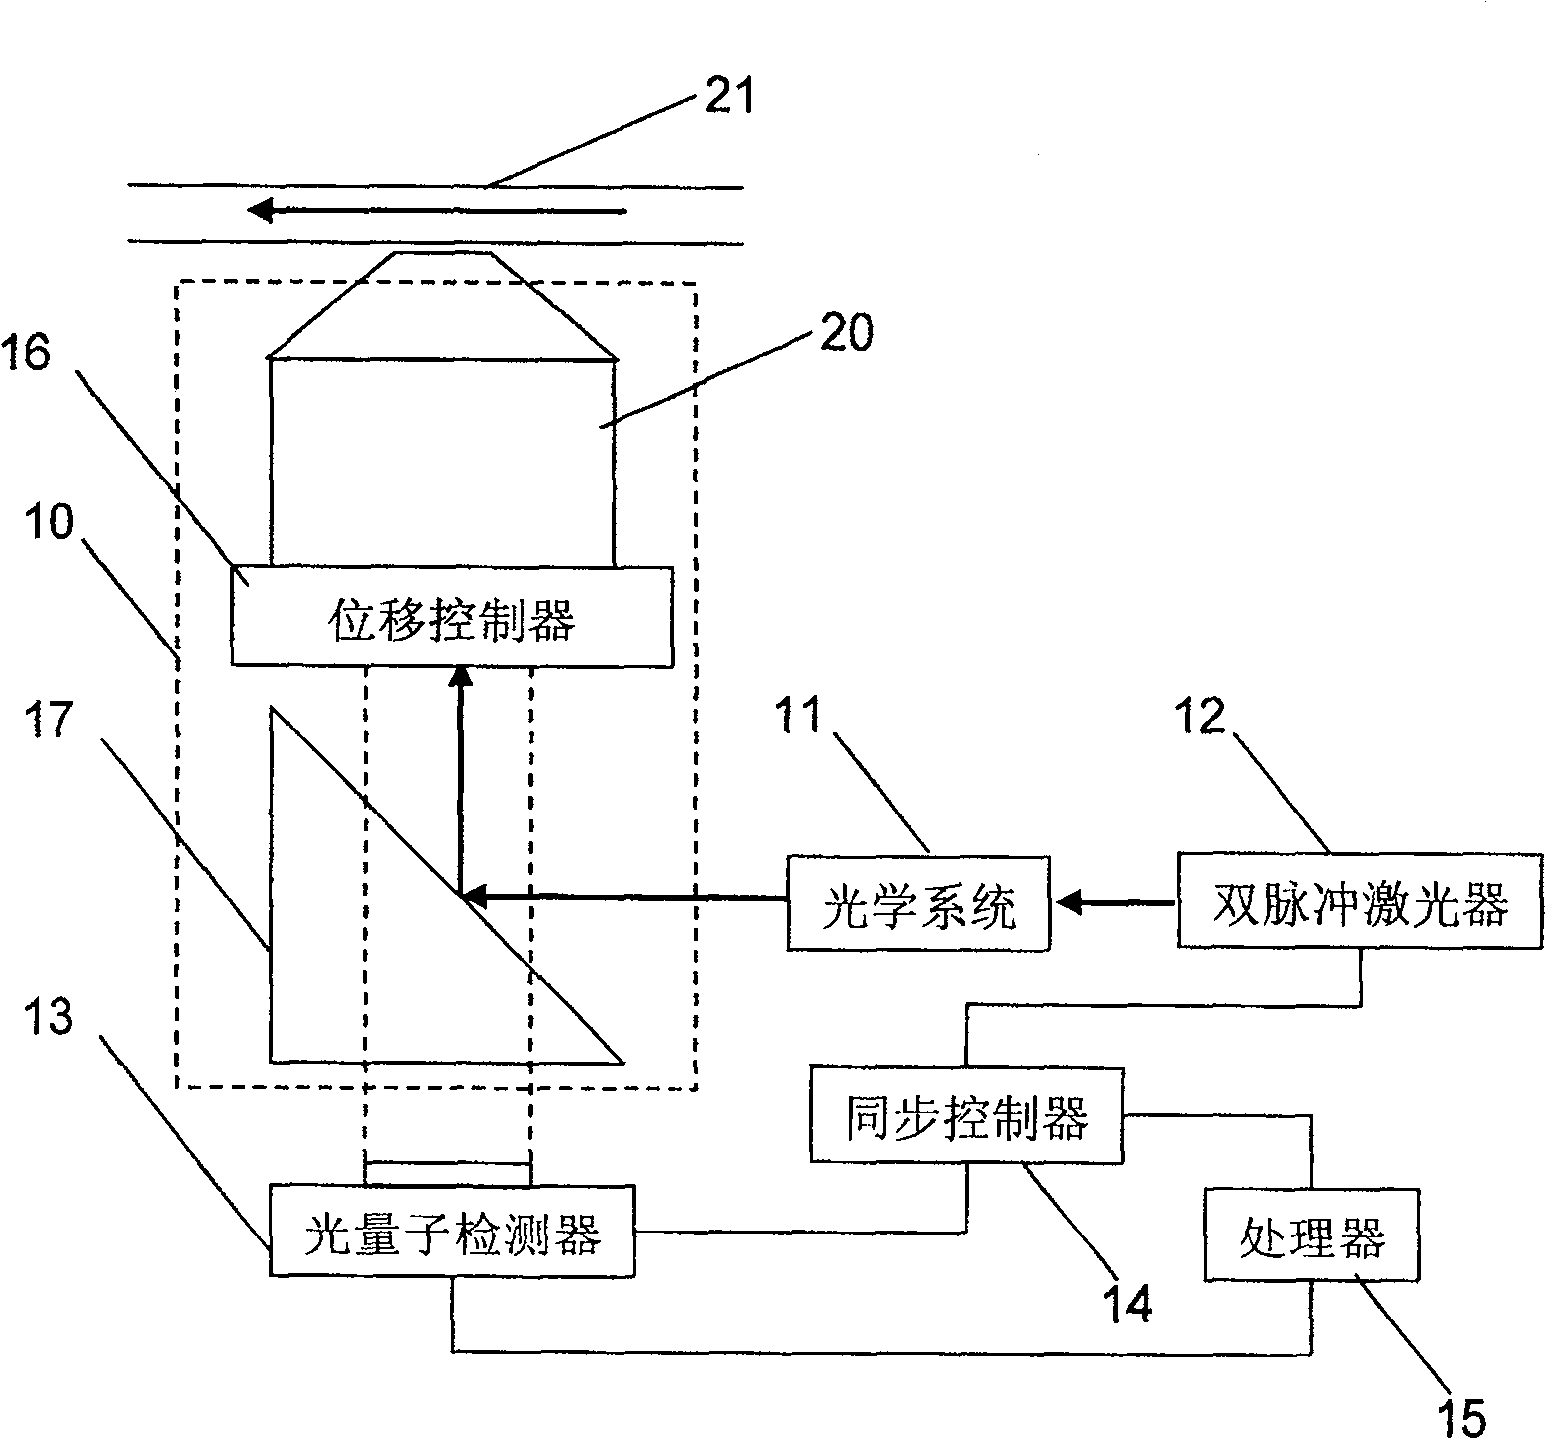 Microchannel speed distribution measuring apparatus and method